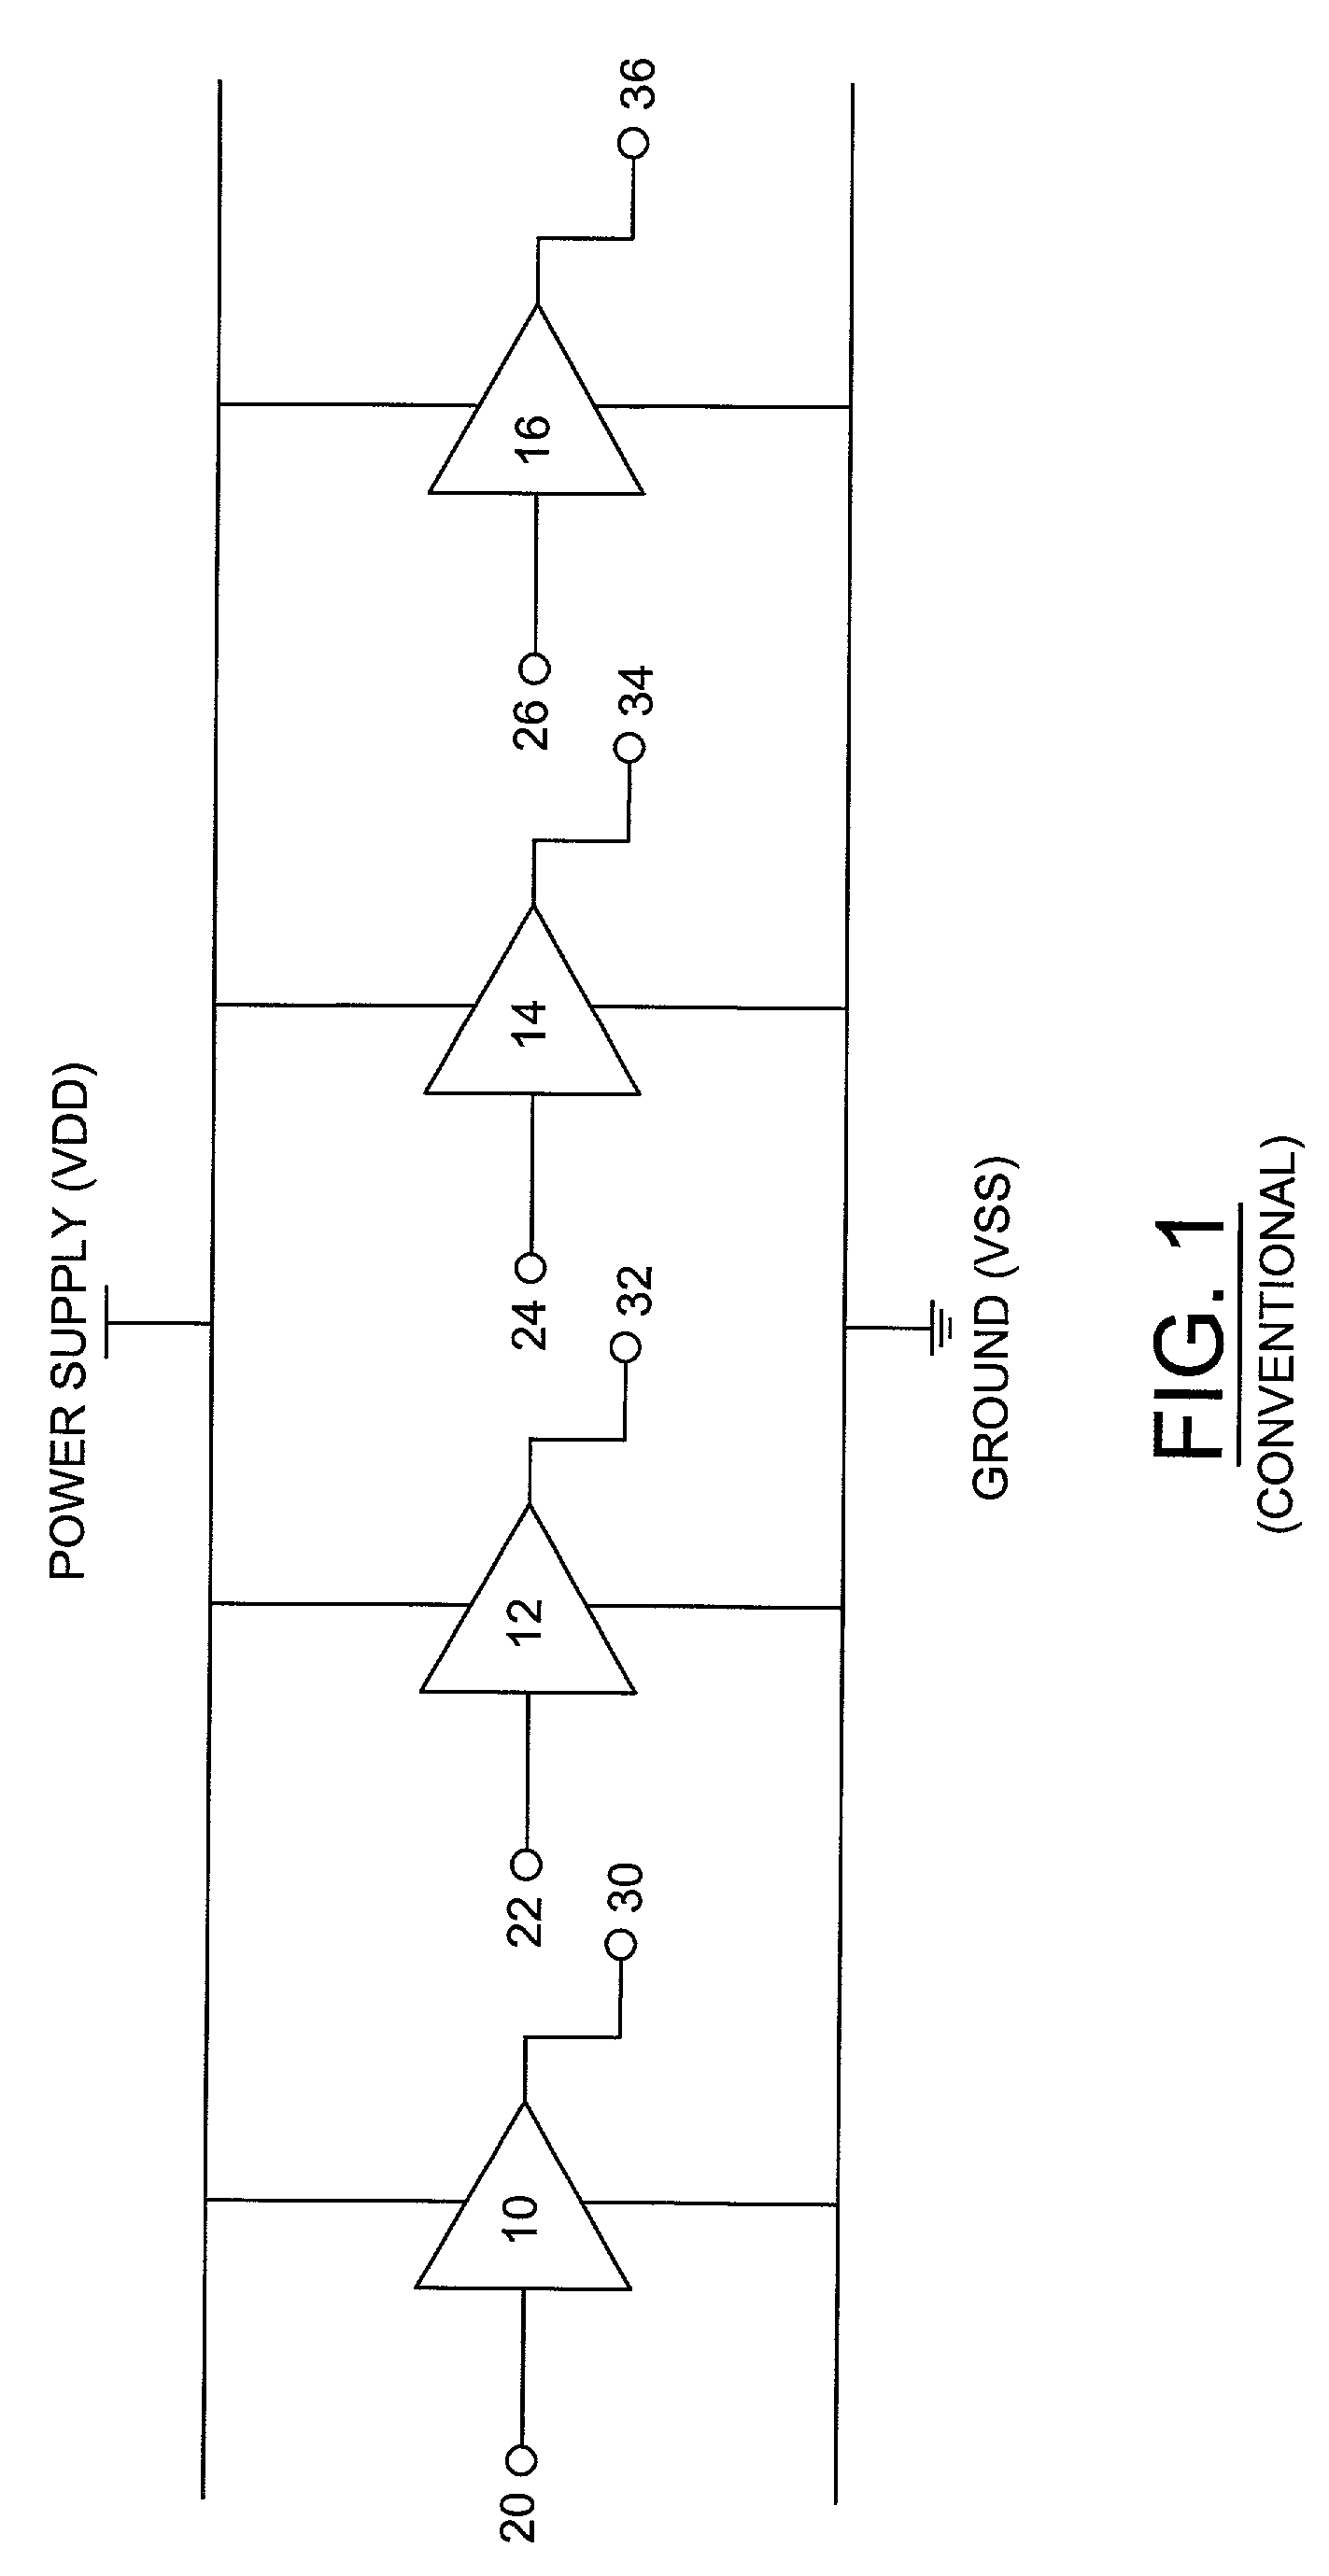 Reducing the effect of simultaneous switching noise